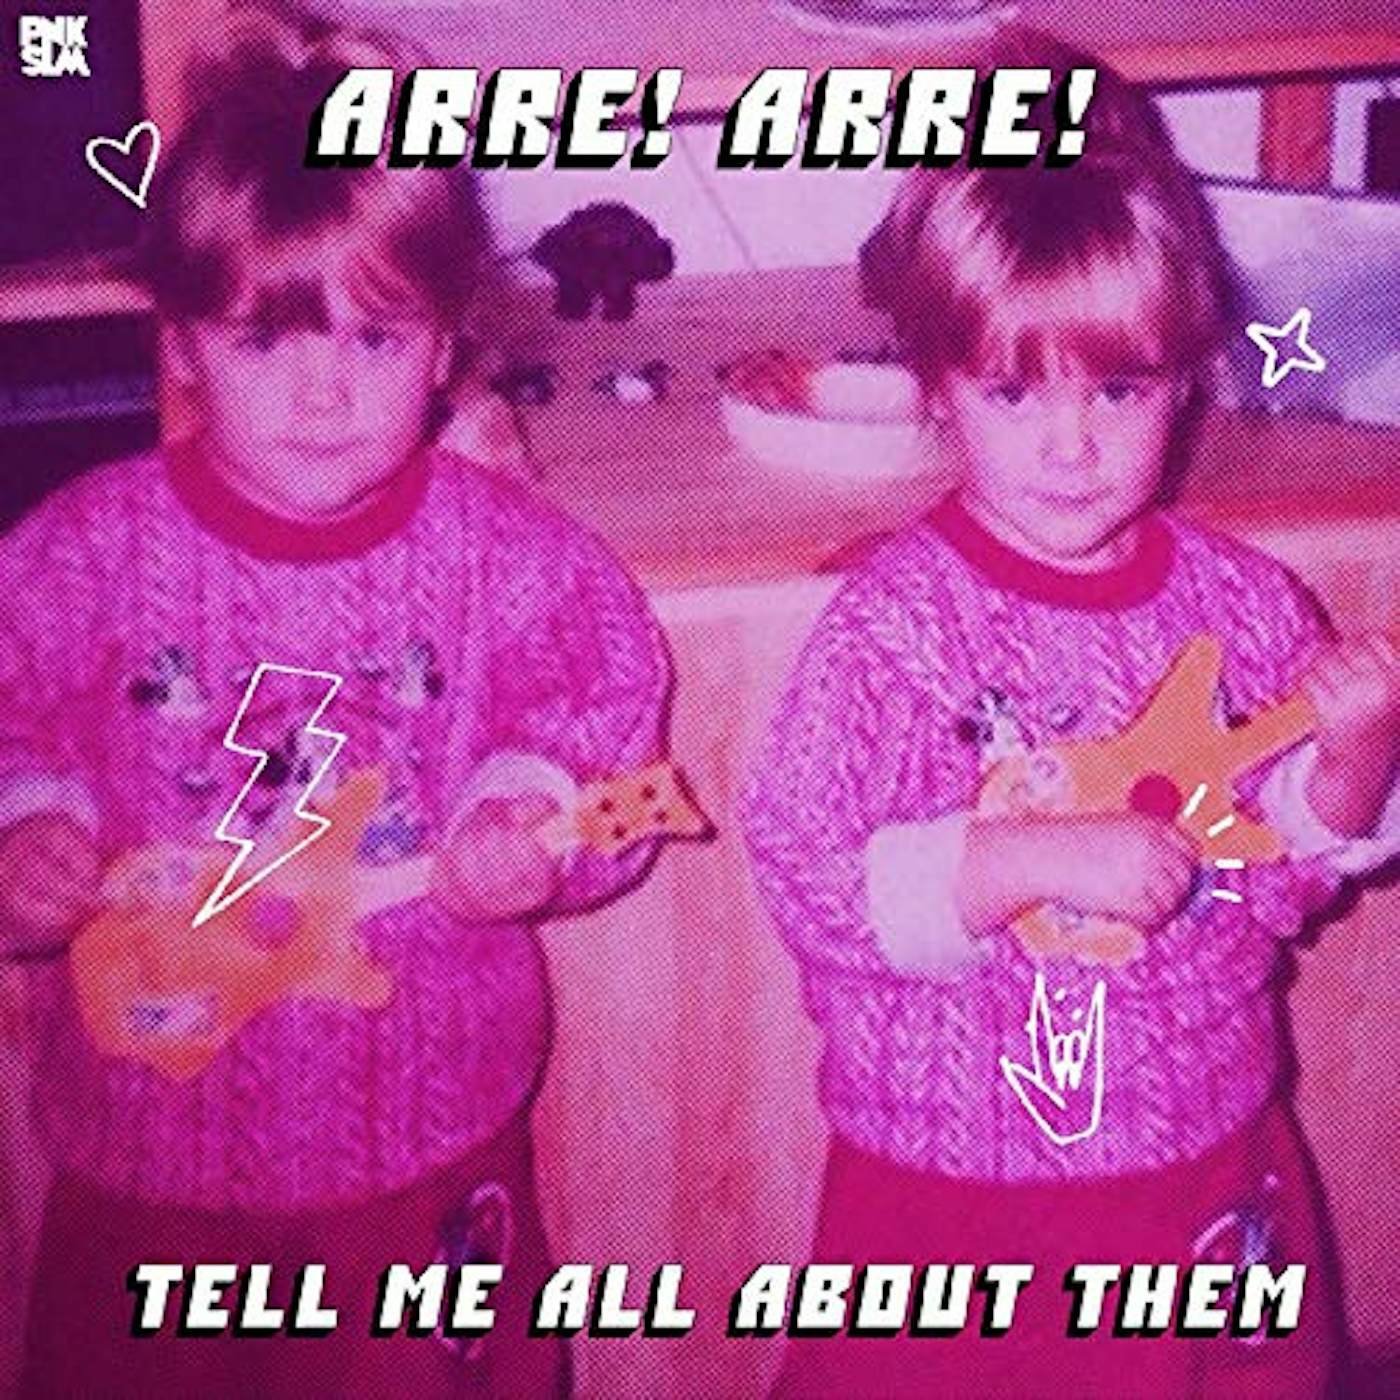 Arre! Arre! Tell Me All About Them Vinyl Record